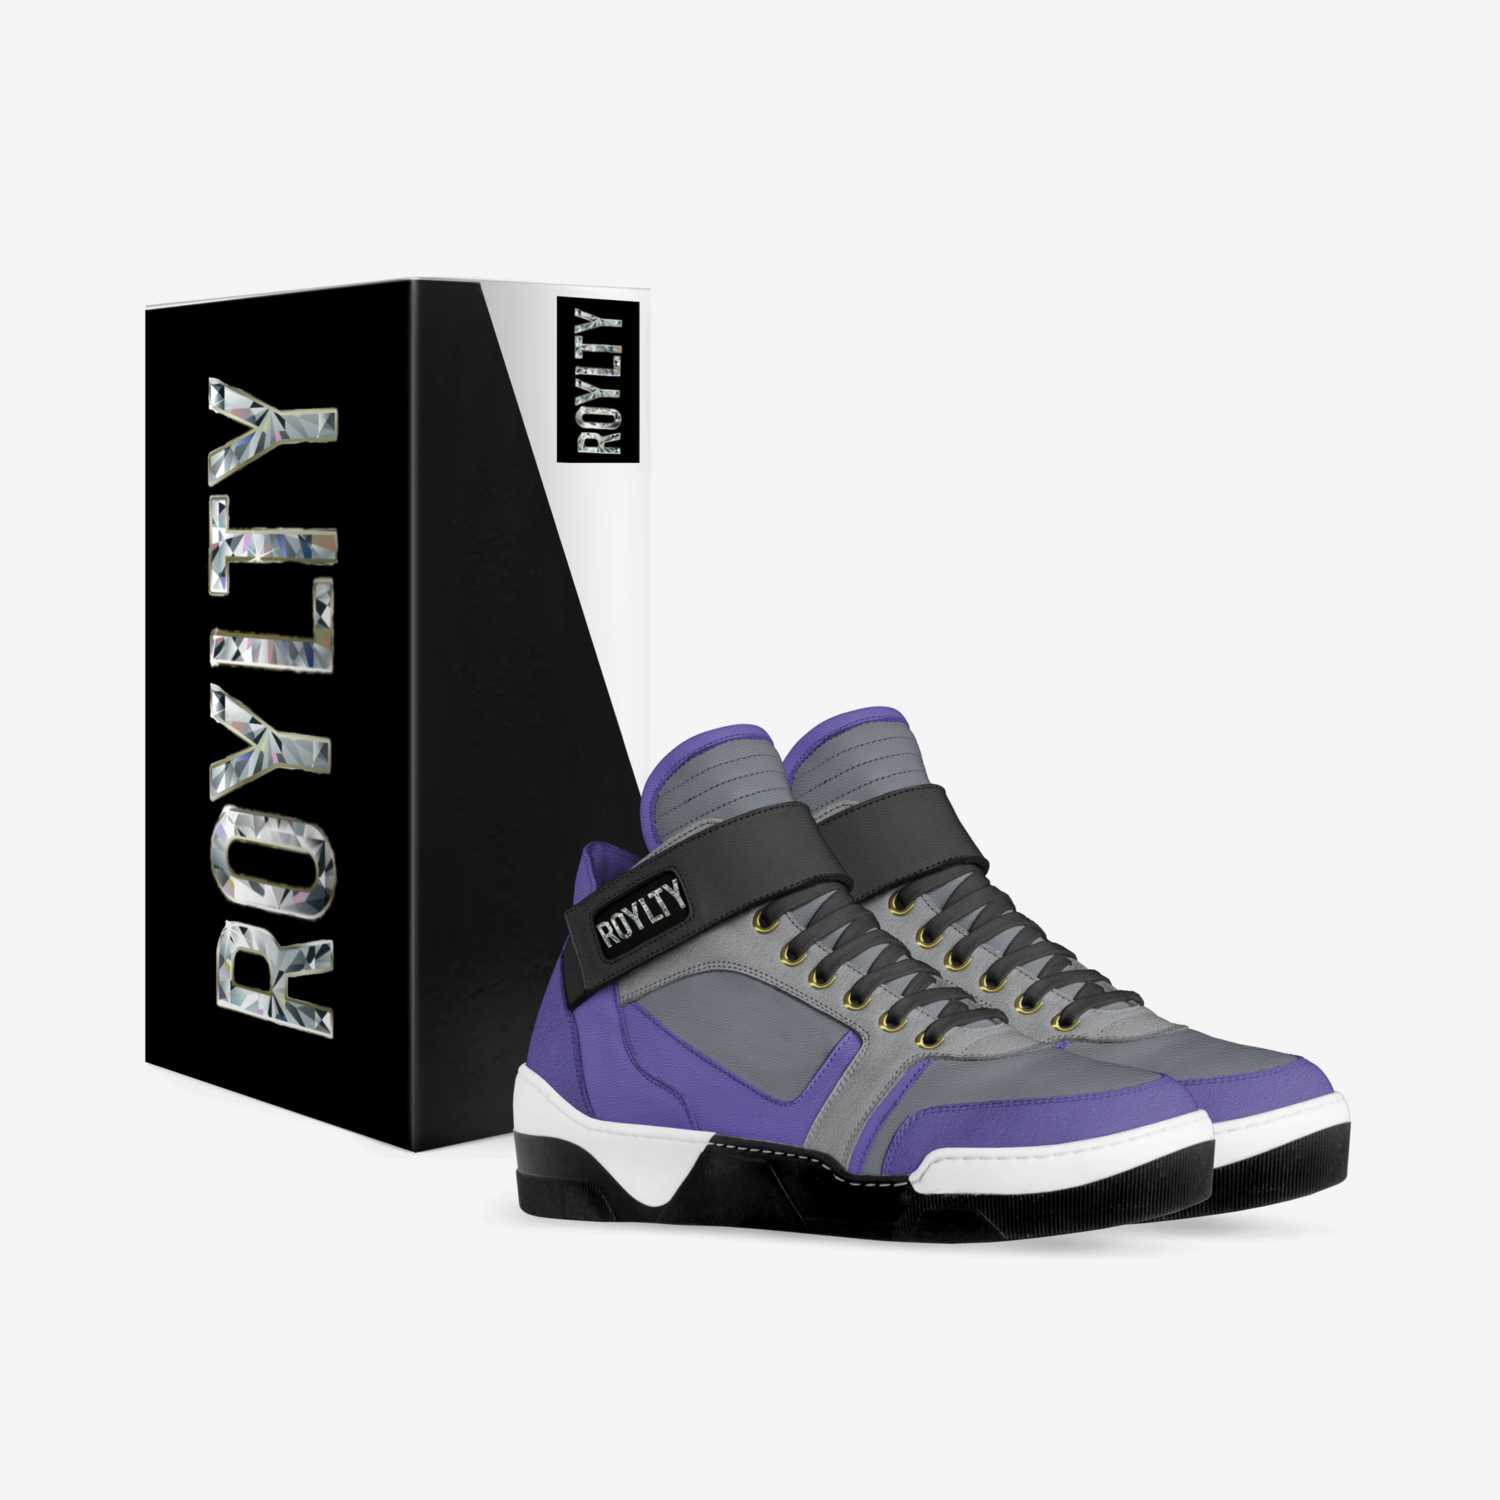 Royal Flush Gang R custom made in Italy shoes by Parris Gardner | Box view